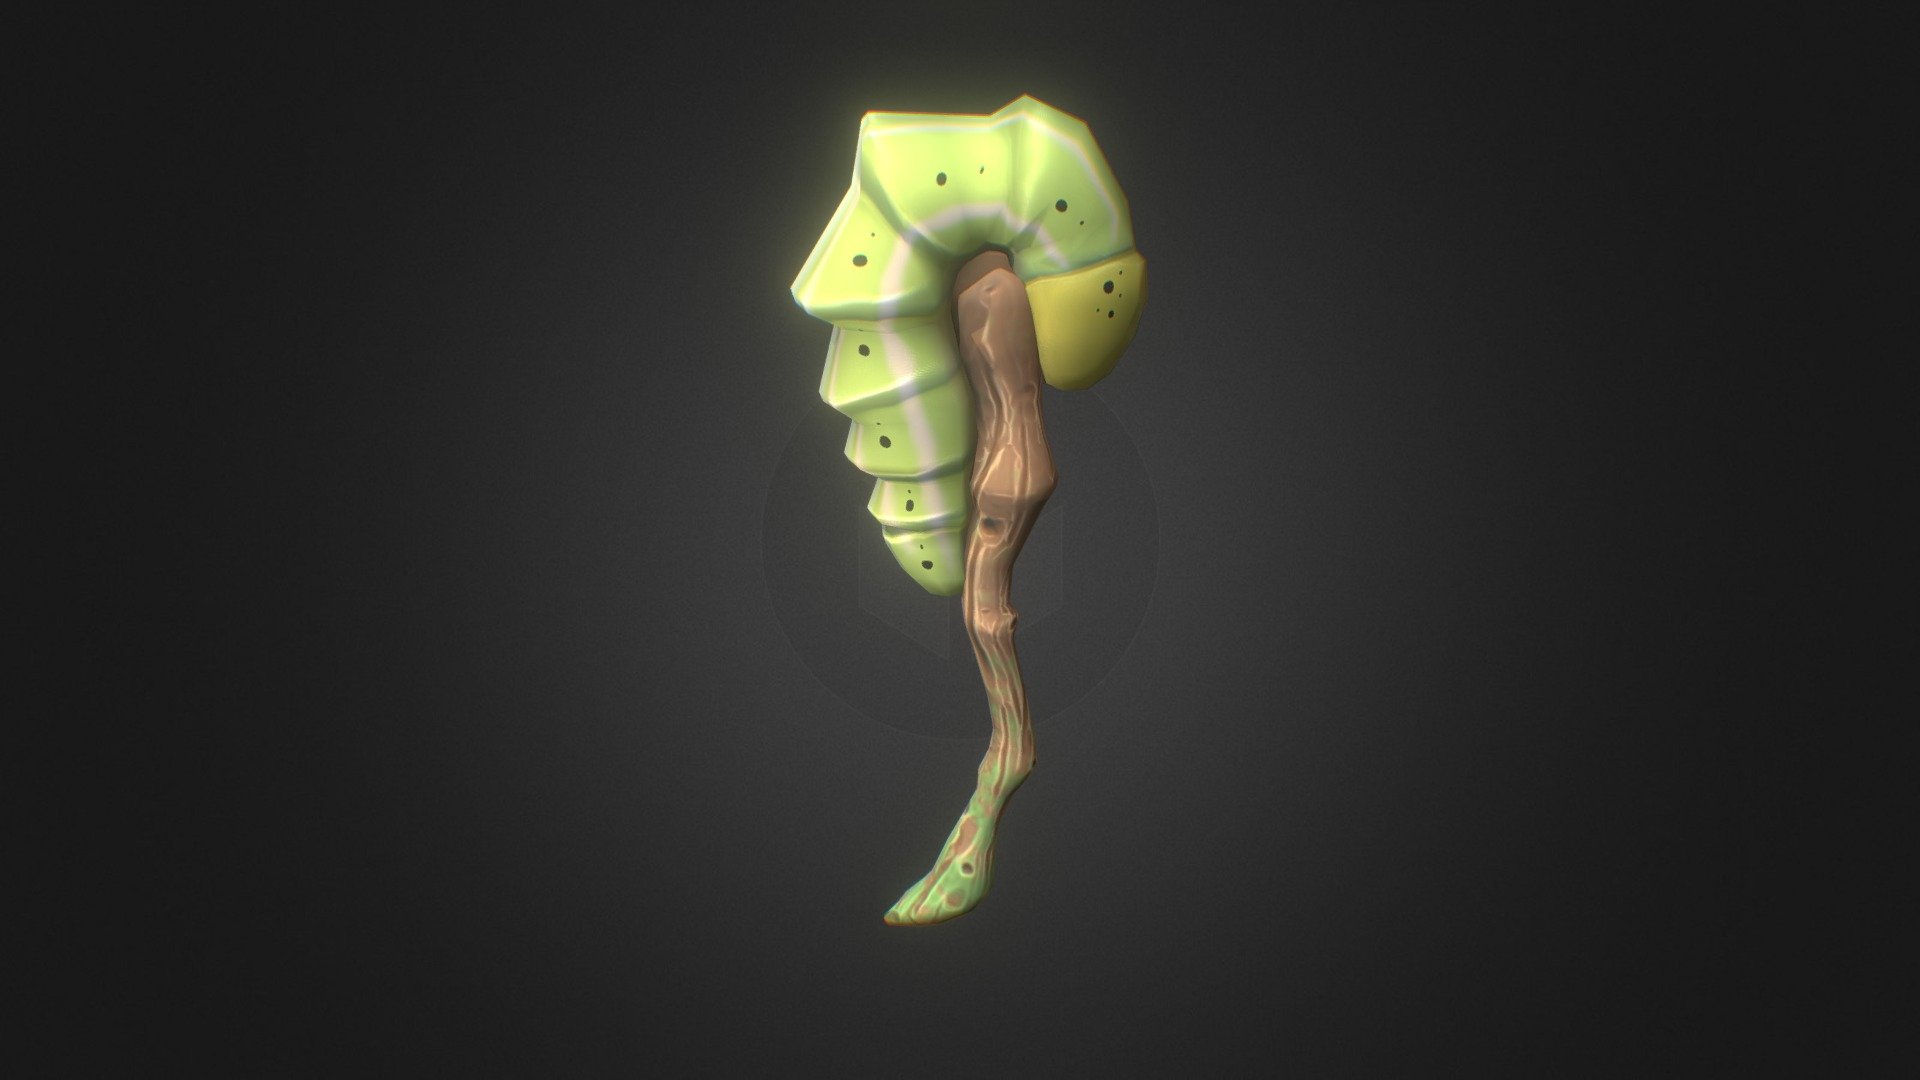 Low Poly Caterpillar Staff for your renders and games

Textures:

Diffuse color, Roughness

All textures are 2K

Files Formats:

Blend

Fbx

Obj

Dae - caterpillar staff asset - Buy Royalty Free 3D model by Vanessa Araújo (@vanessa3d) 3d model